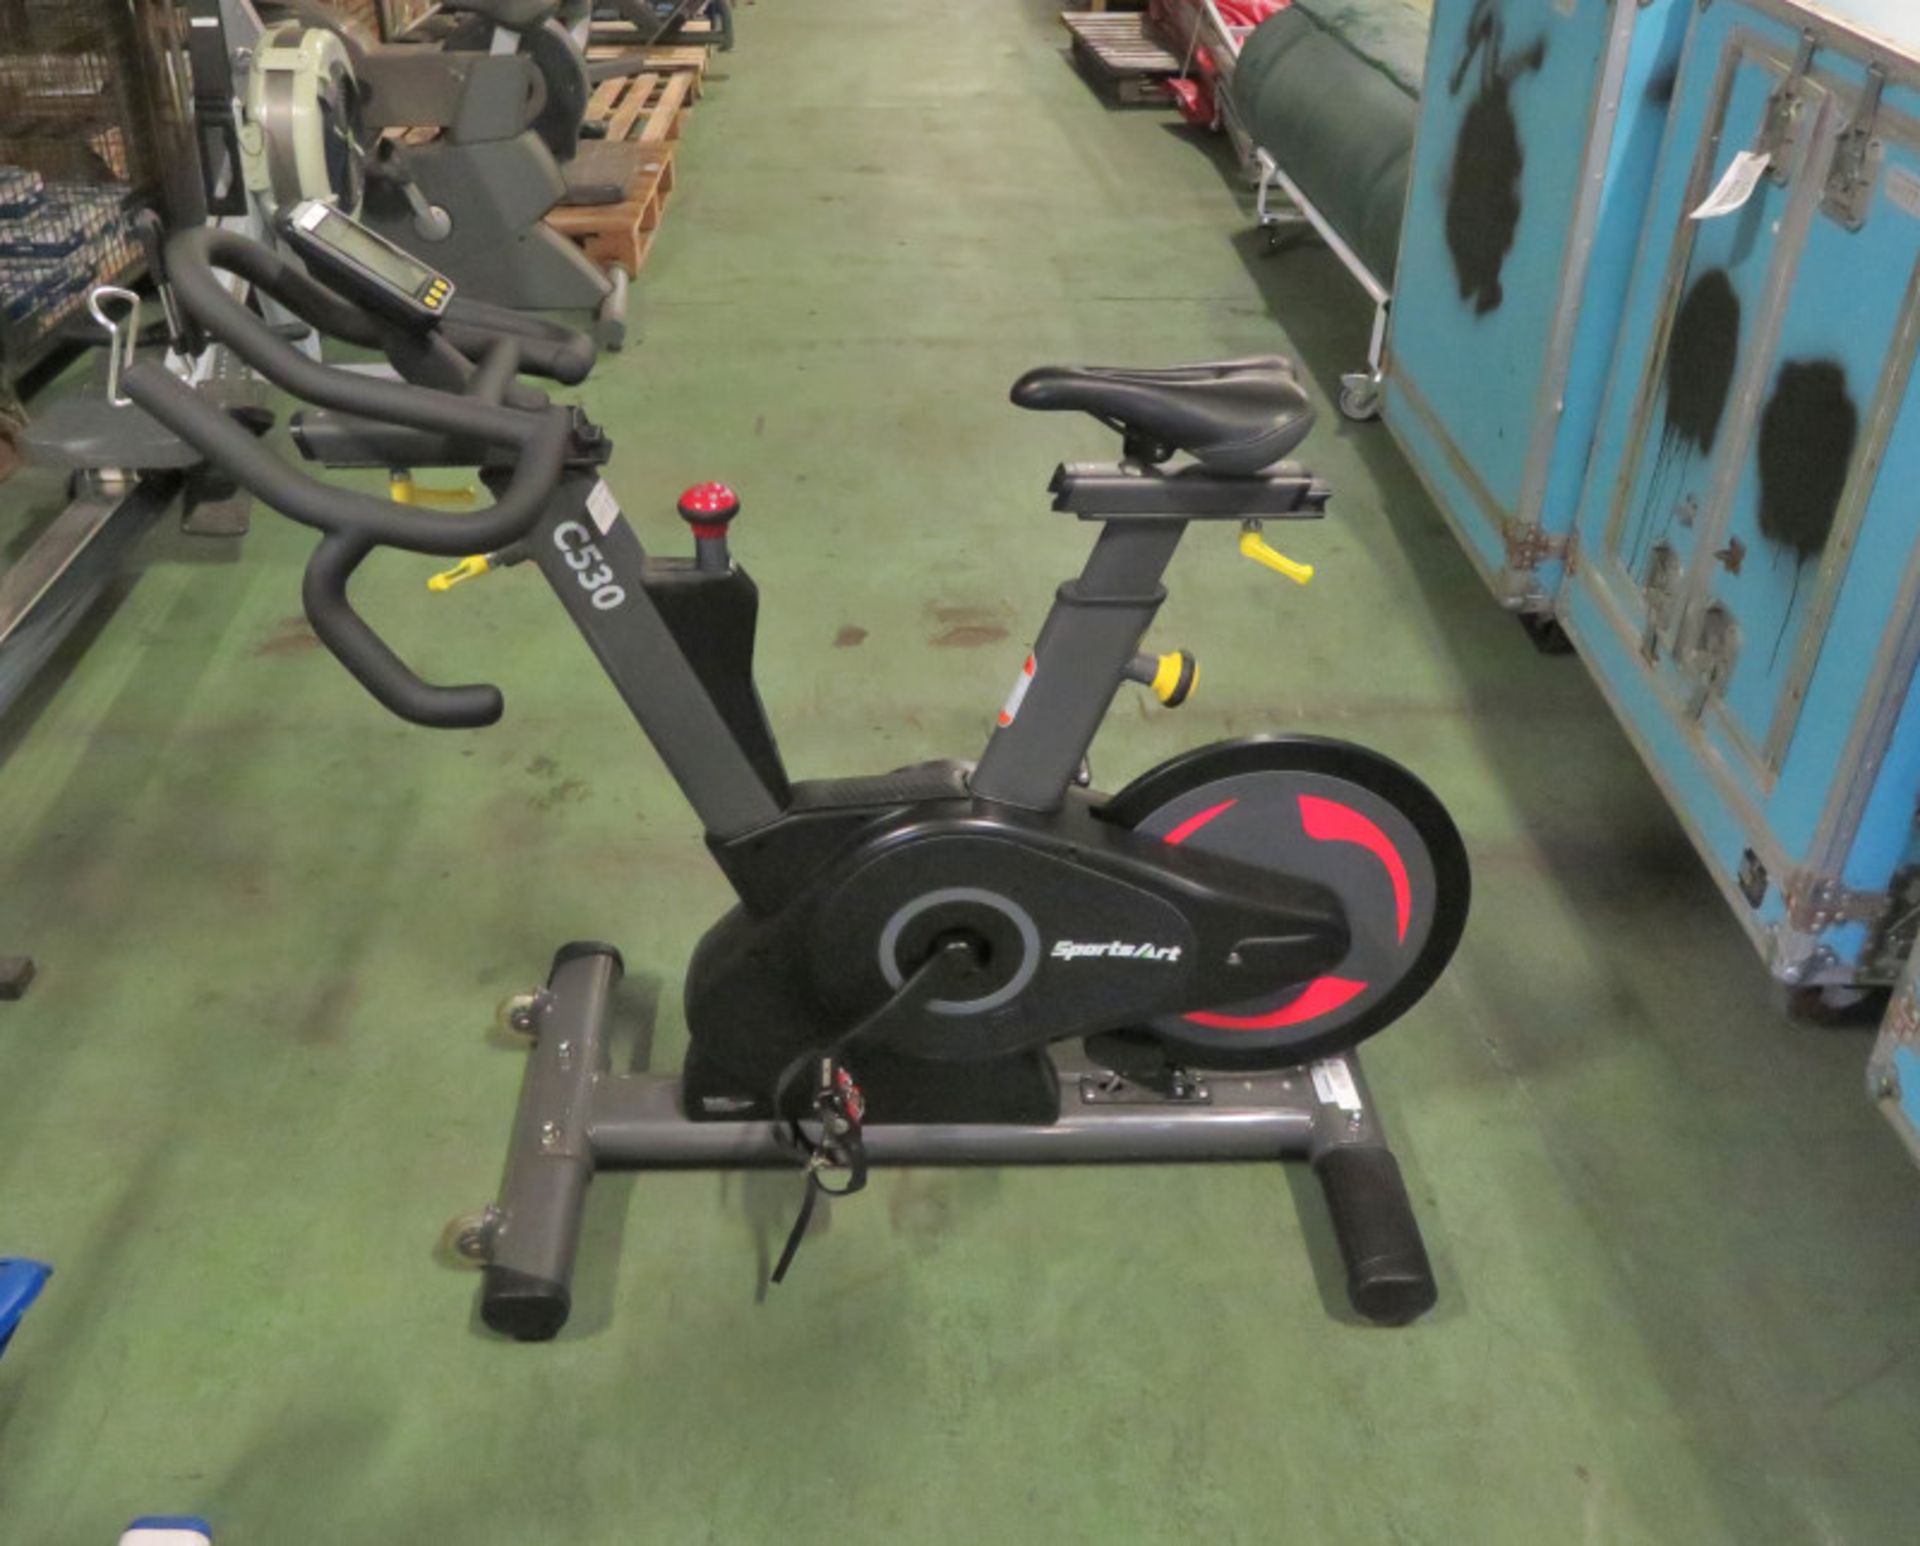 SportsArt C530 Exercise Bike with display module - Powers on but fundctions not tested